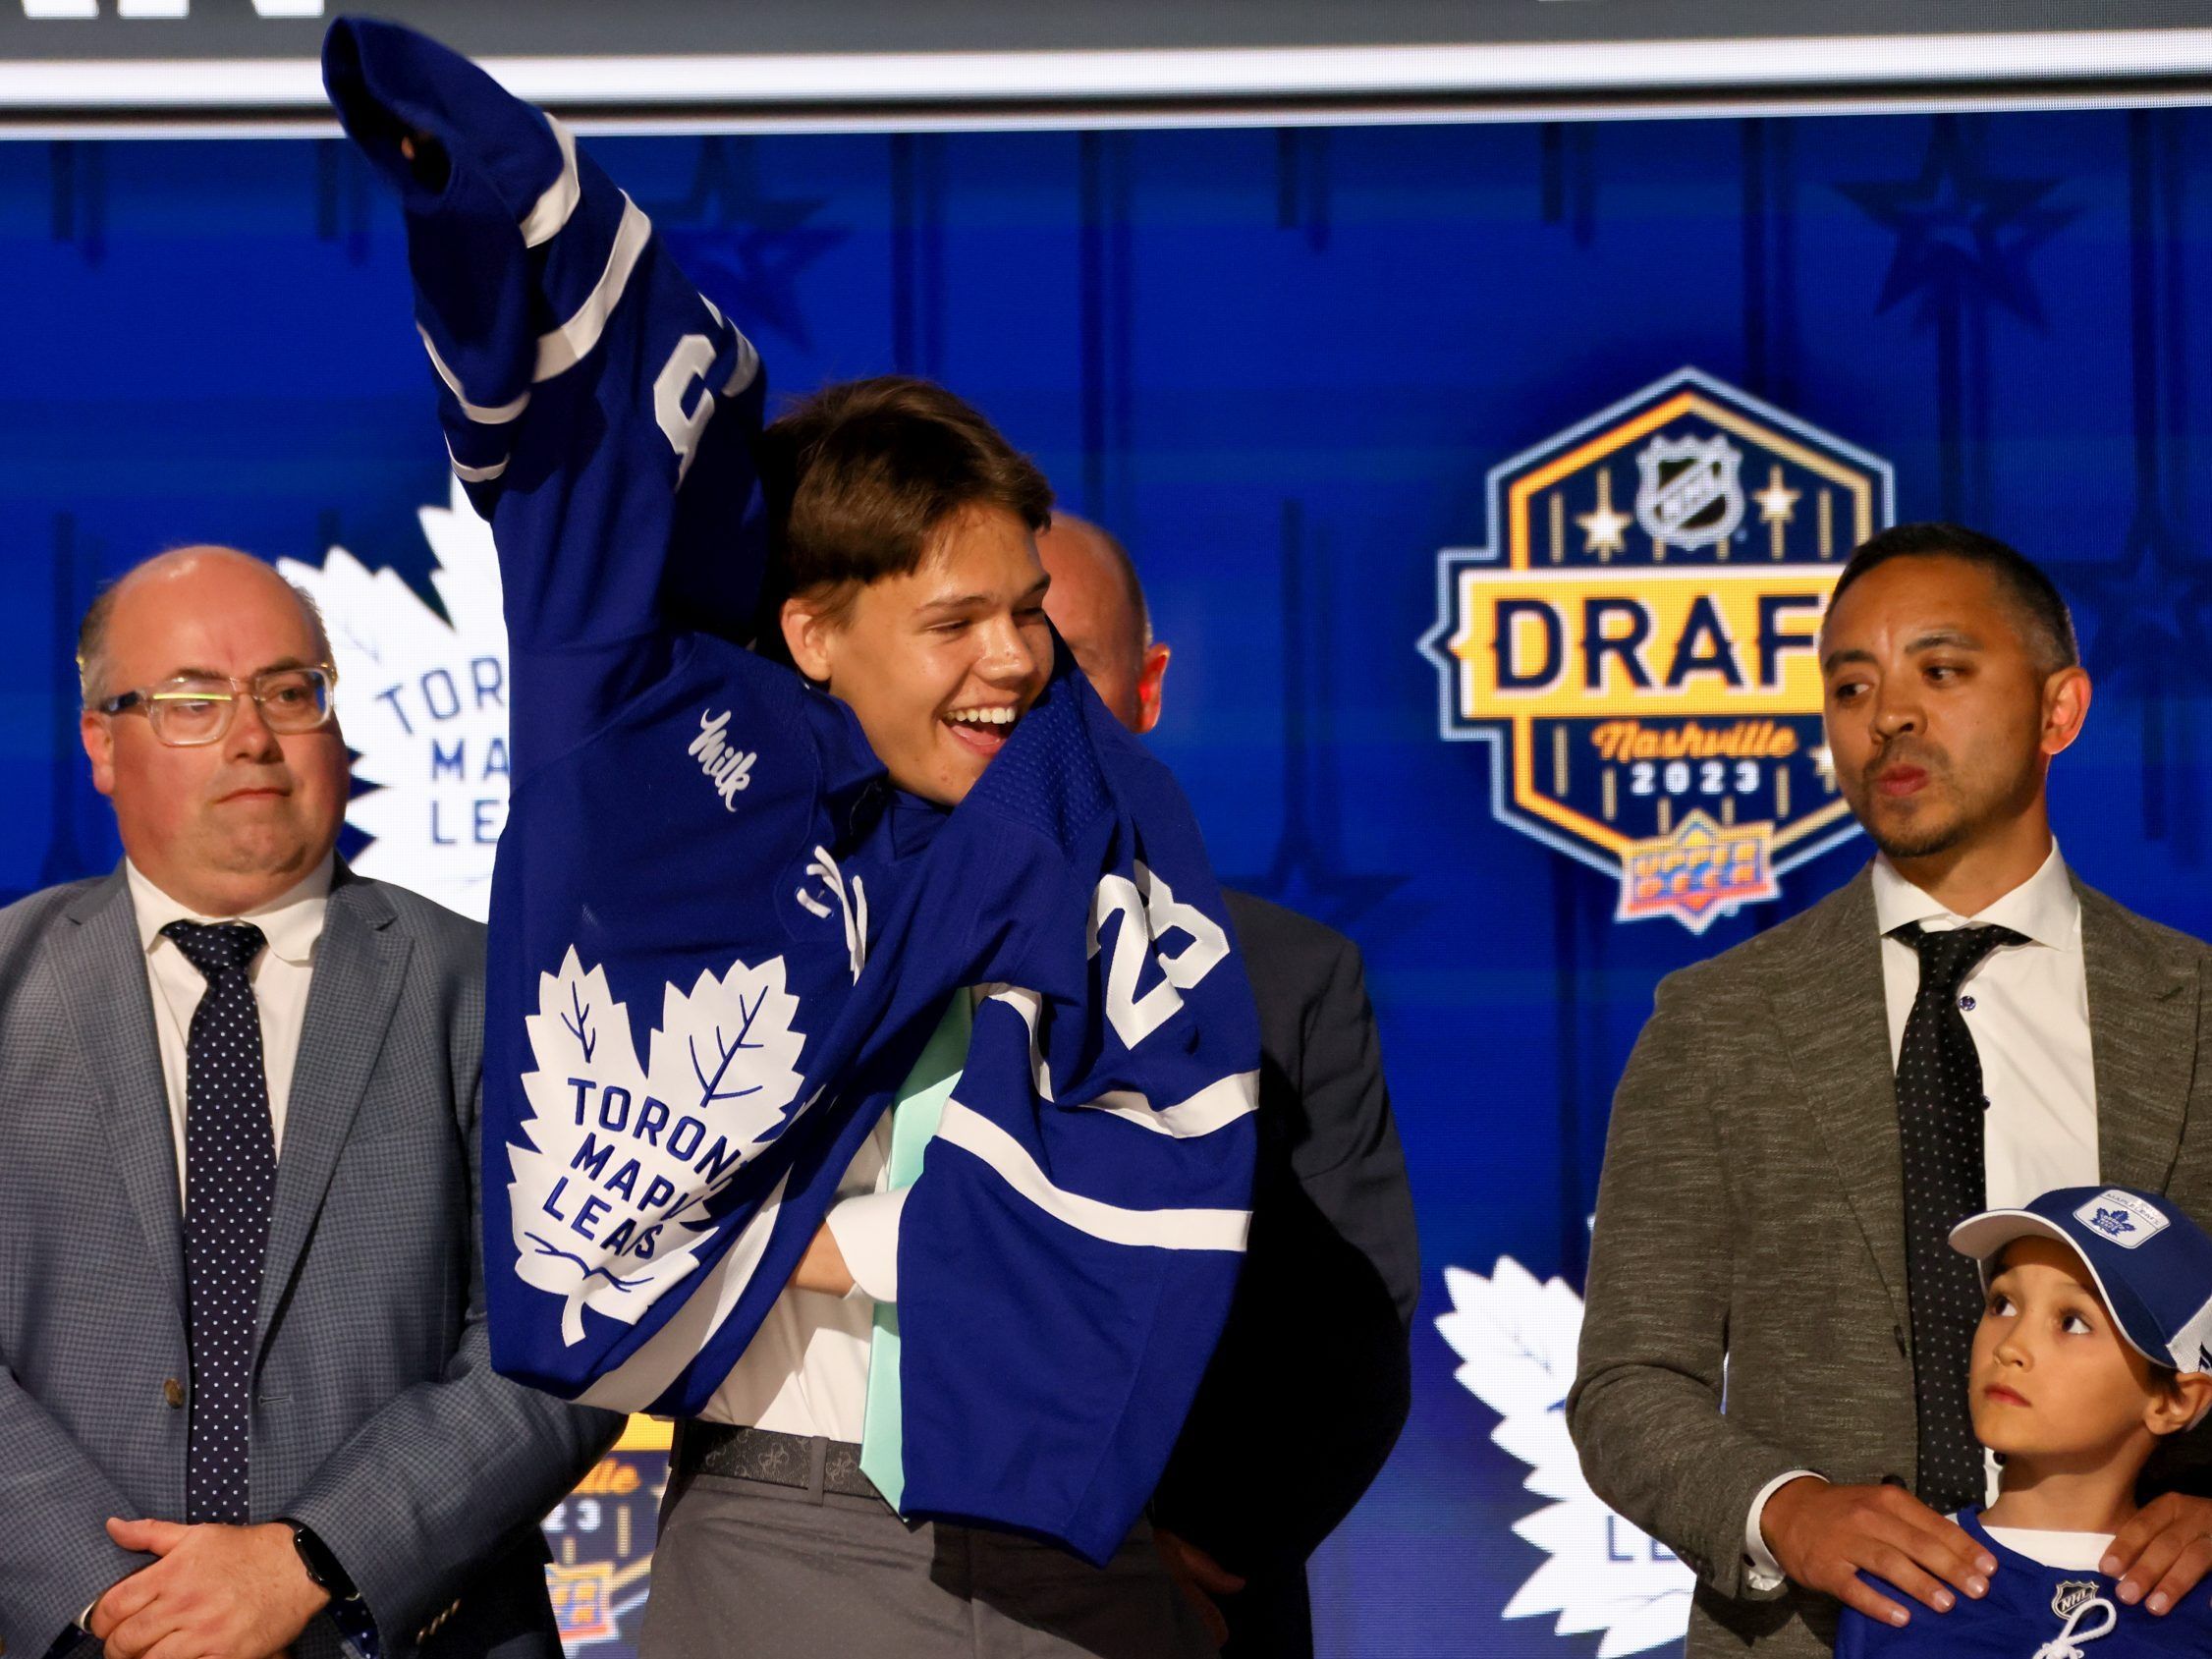 London Knights winger Easton Cowan unexpected top pick for Maple Leafs Toronto